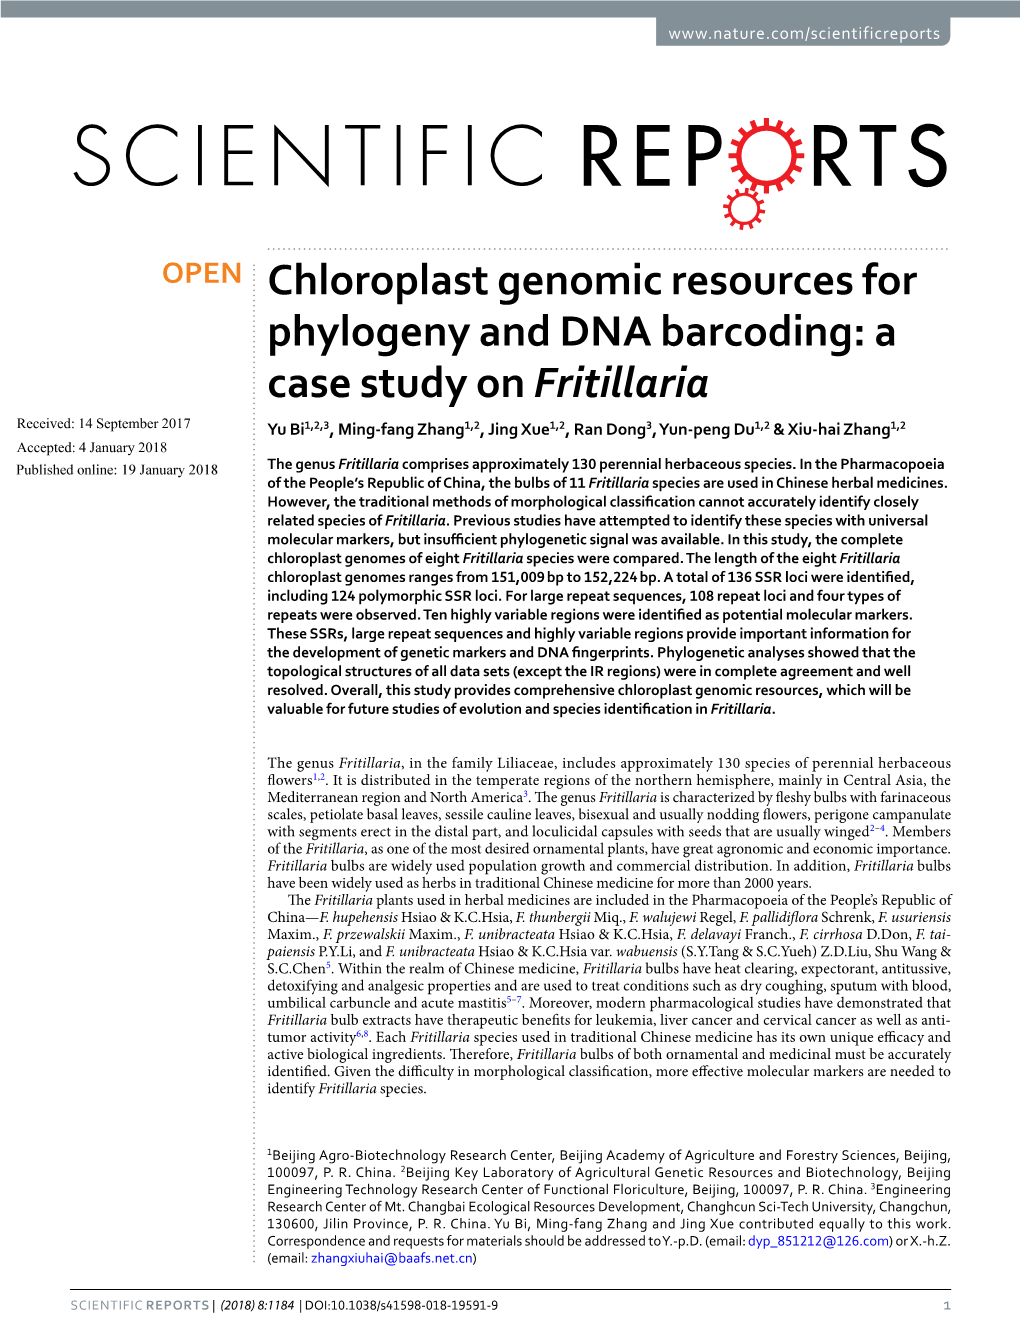 Chloroplast Genomic Resources for Phylogeny and DNA Barcoding